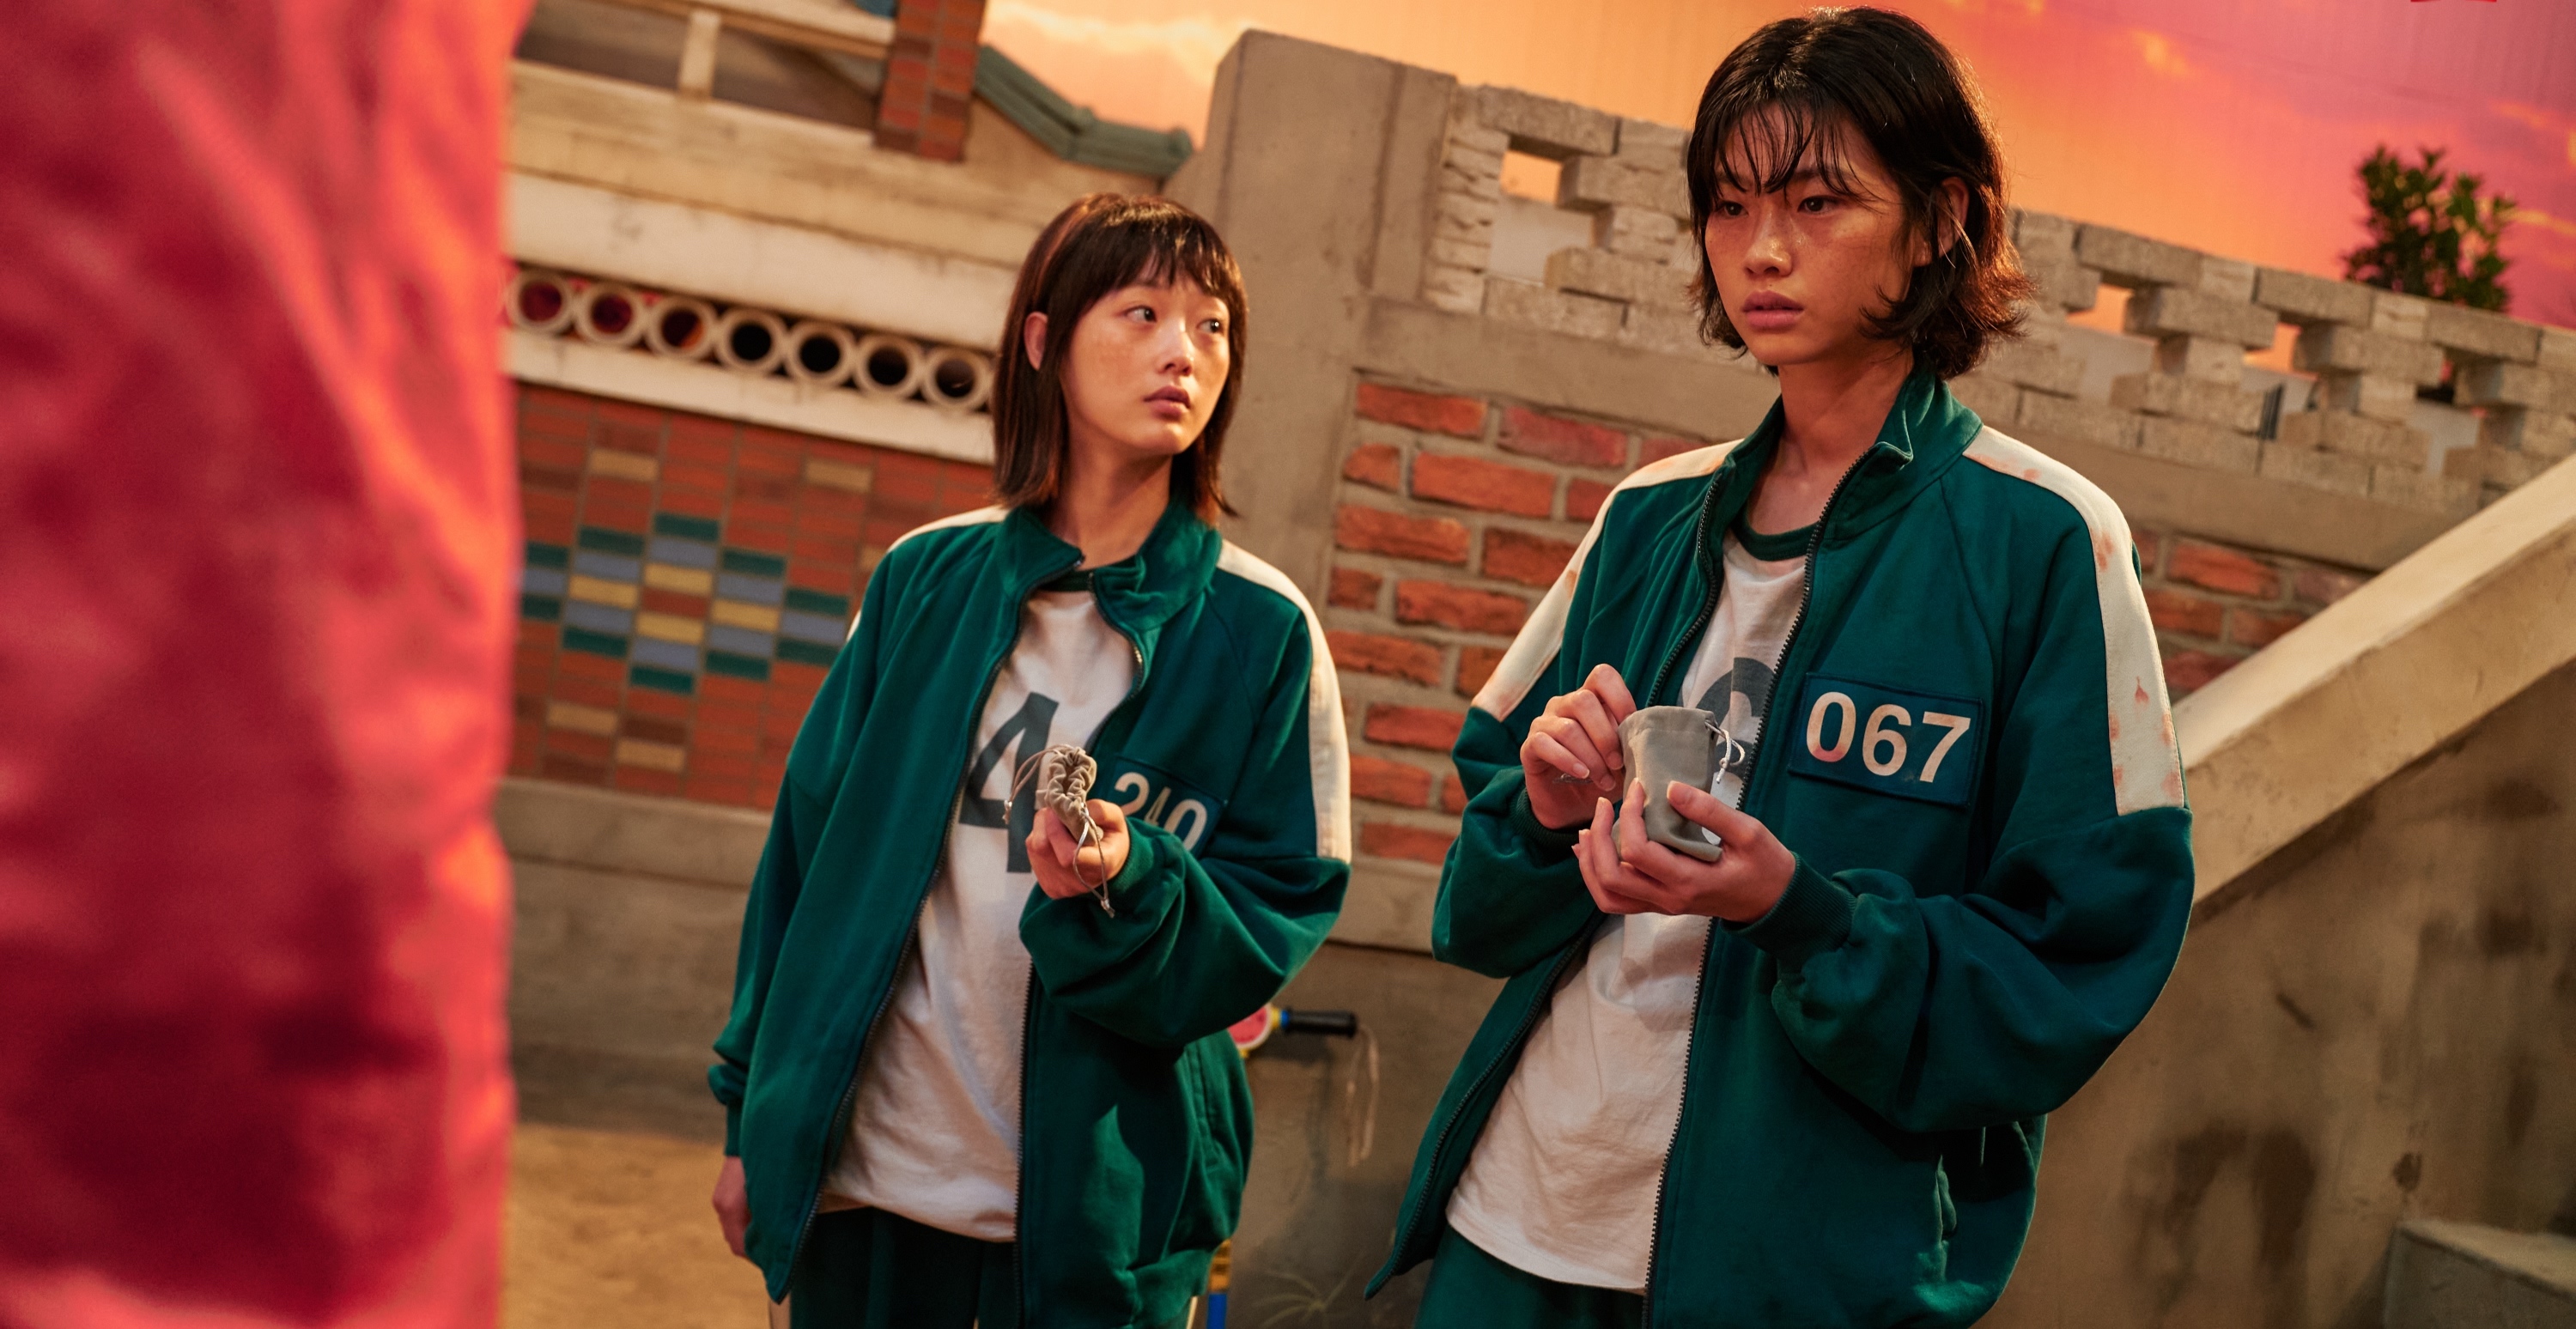 Lee Yoo-Mi as Ji-Yeong and Jung Ho-Yeon as Kang Sae-Byeok for Netflix's 'Squid Game' wearing green tracksuits and holding marbles